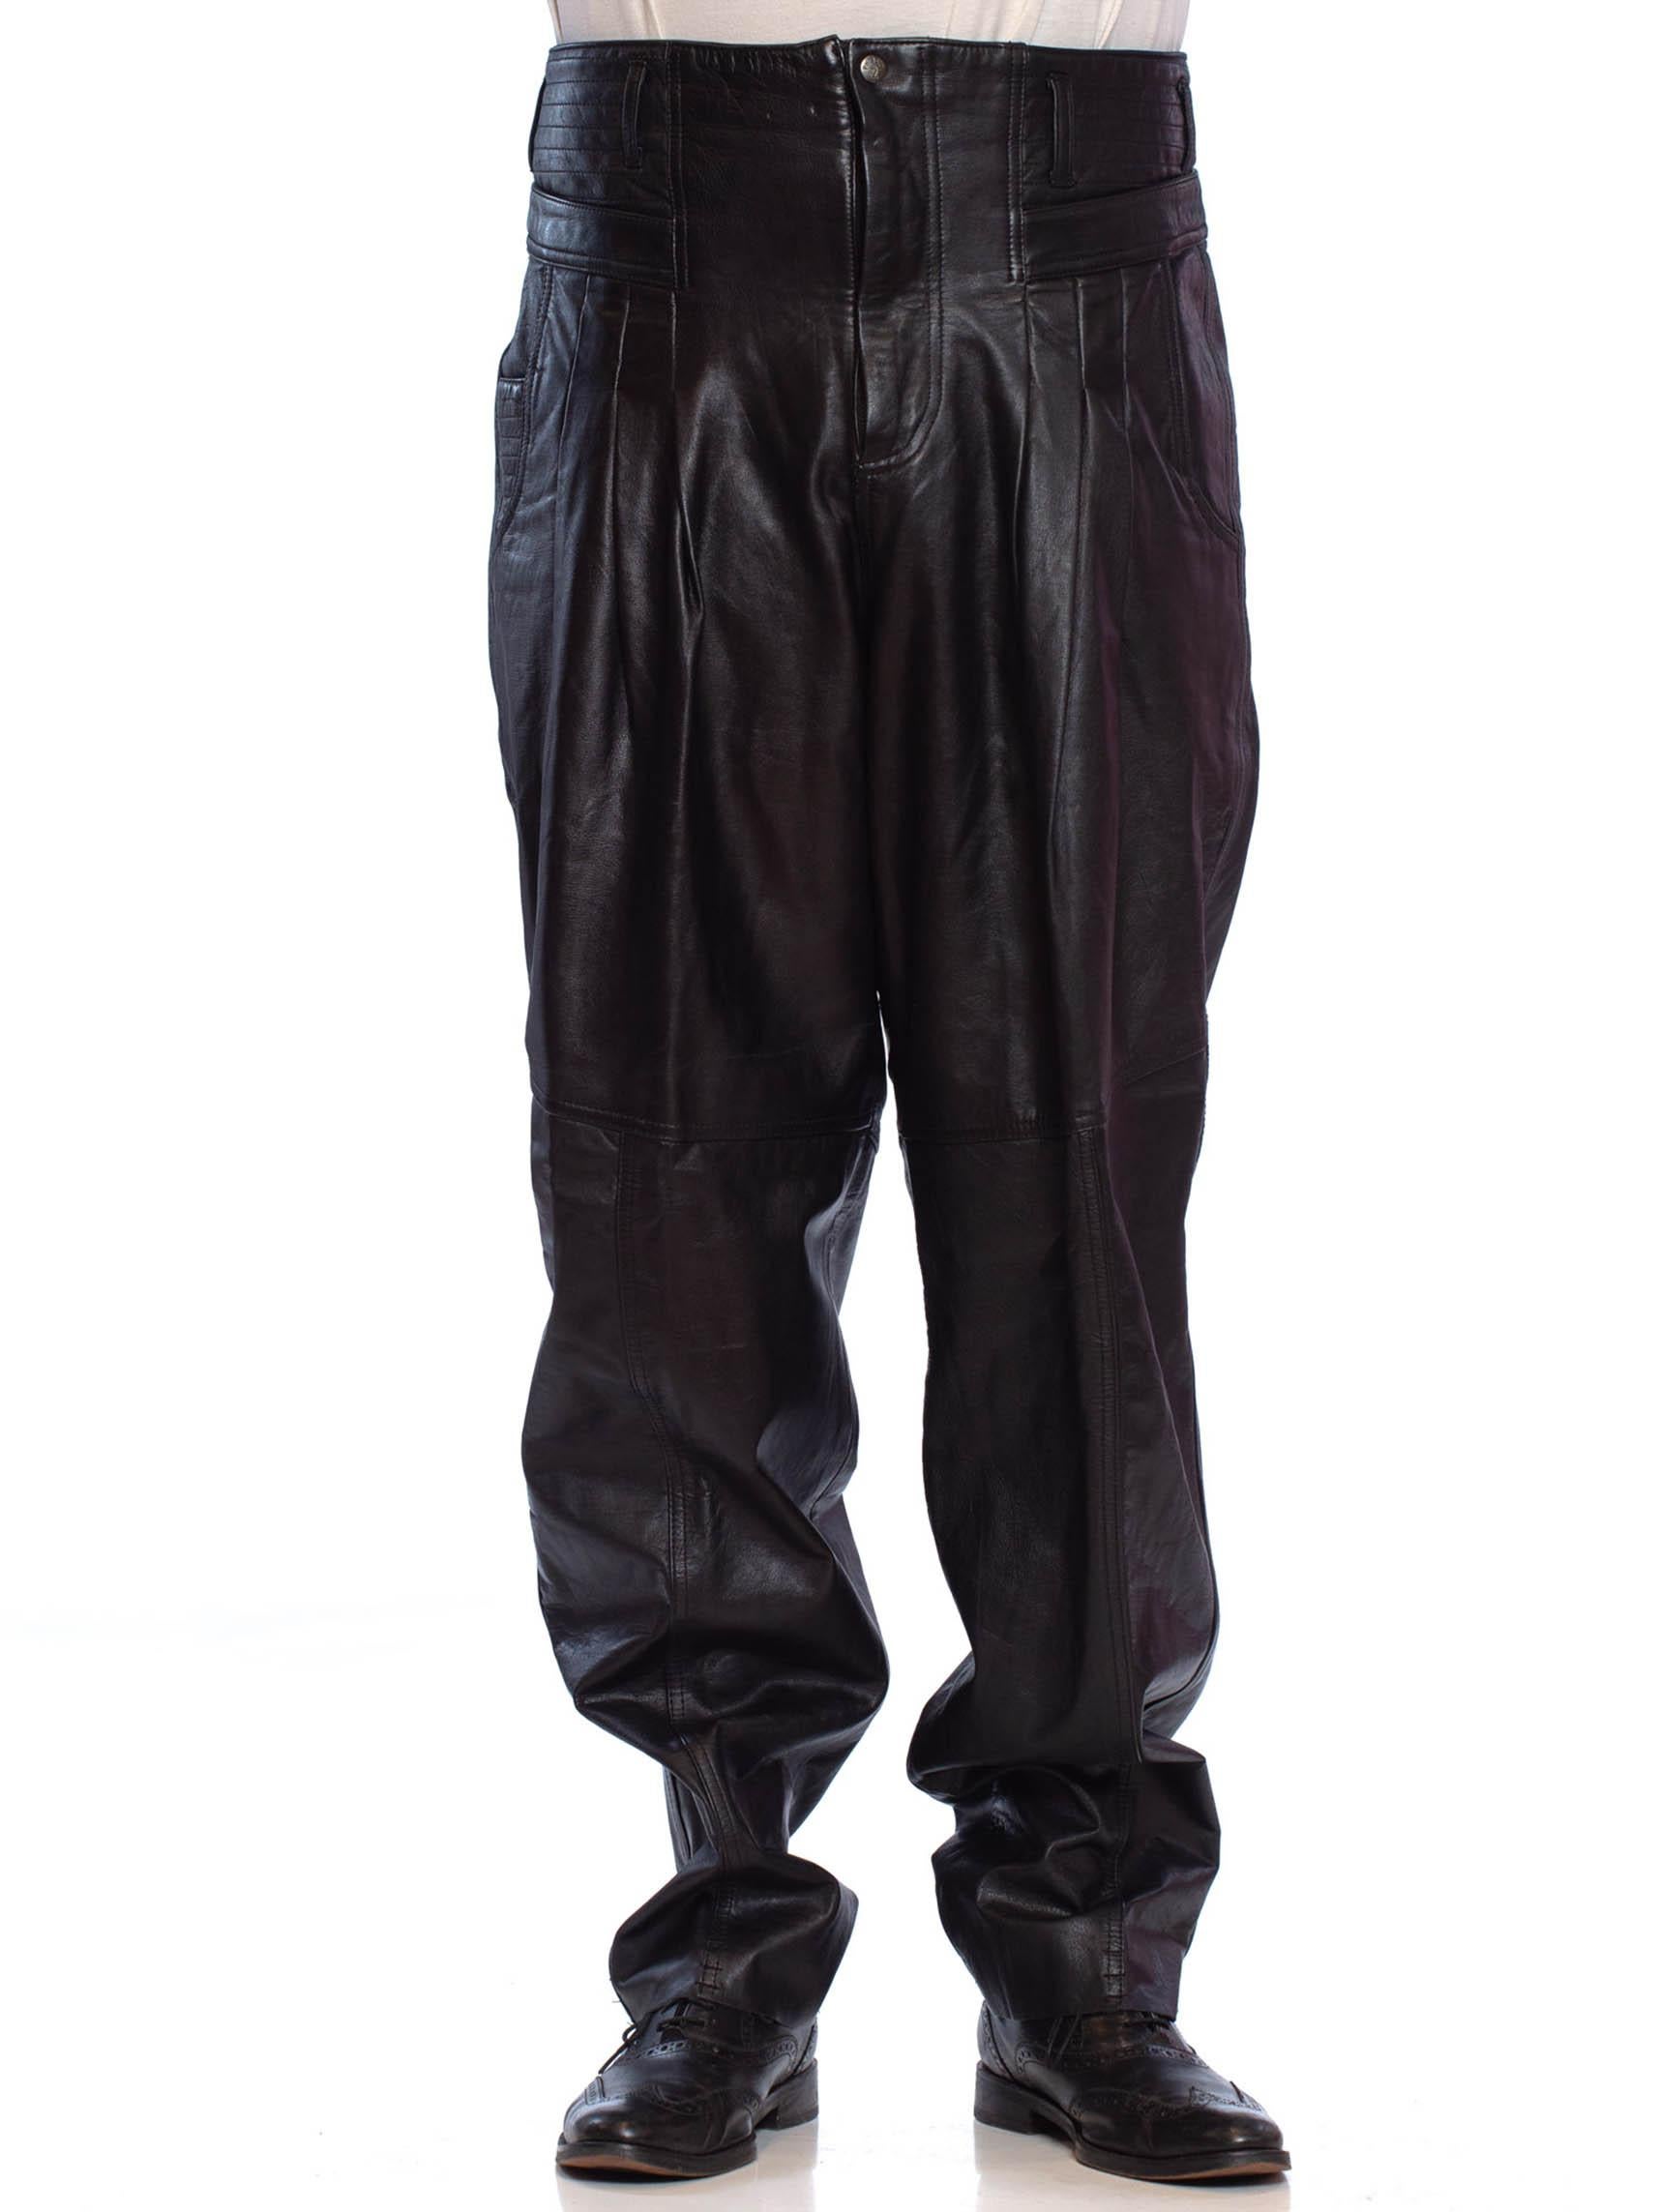 1980'S CLAUDE MONTANA Style Black Leather Men's New Wave High-Waisted Pleated Pants